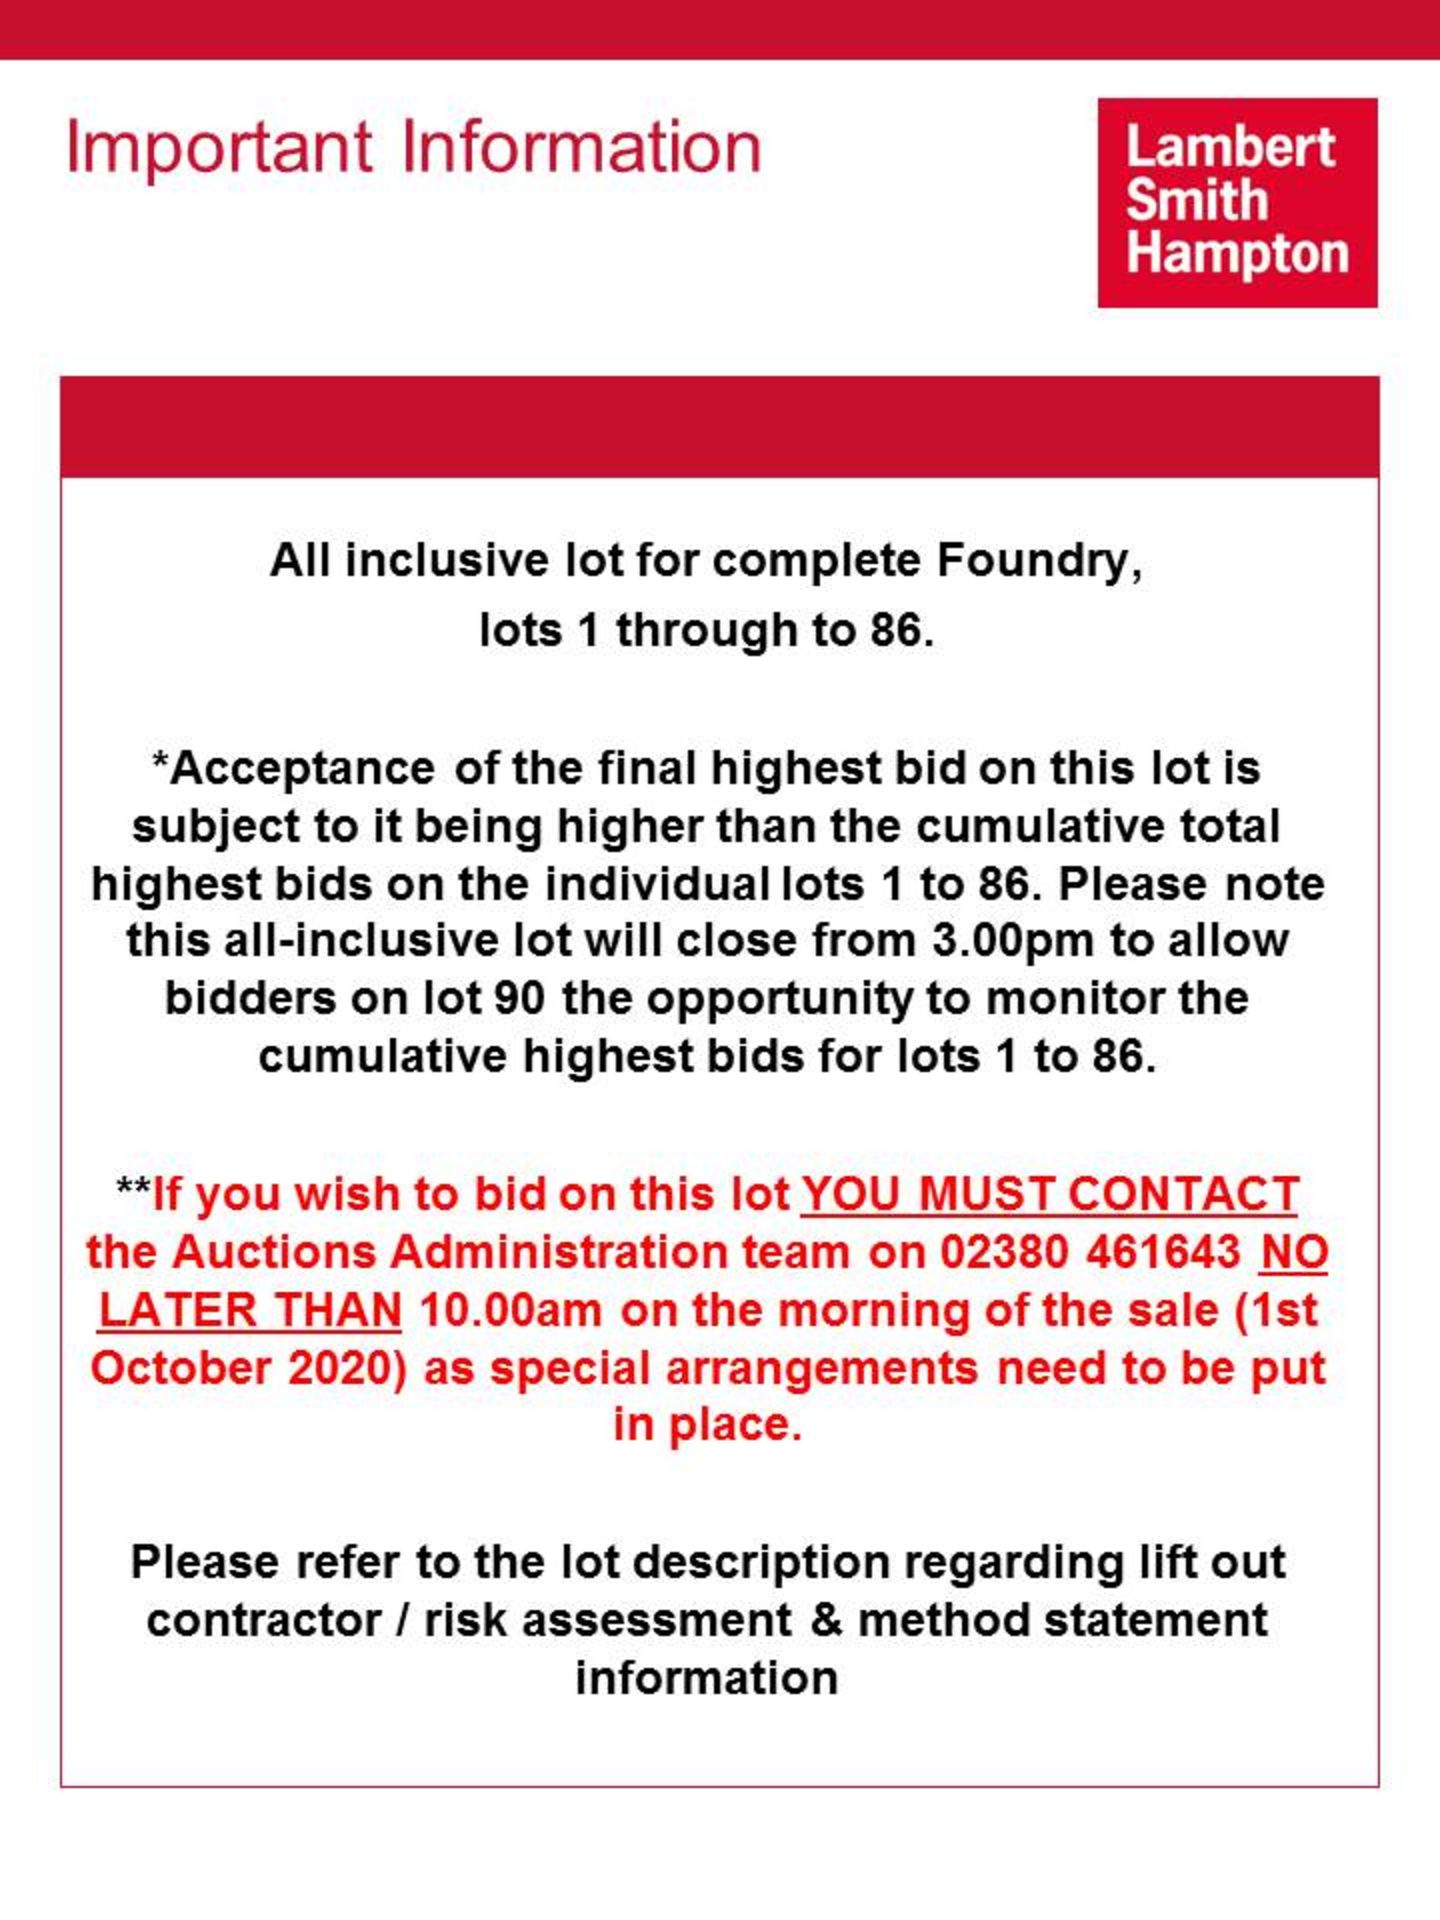 All inclusive lot for complete Foundry, lots 1 through to 86. *Acceptance of the final highest bid